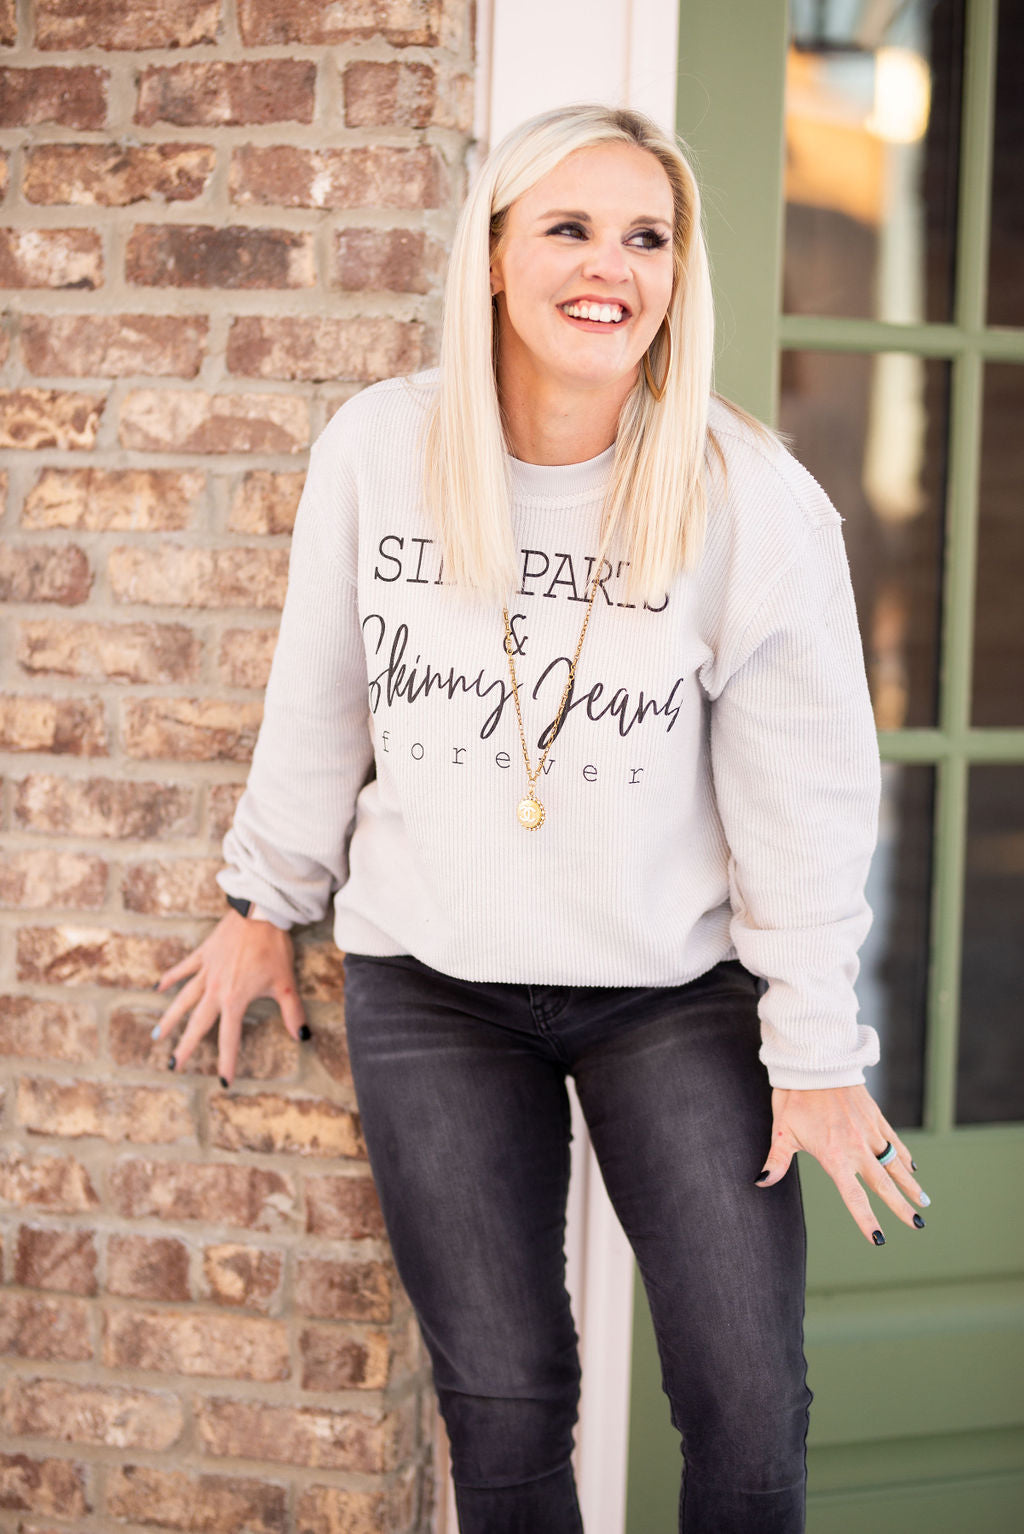 Side Parts and Skinny Jeans Retro Vibes Sweatshirt / Millennial Mom Life/ Western Vintage Style Sweater -Funny Millennial Sweatshirt